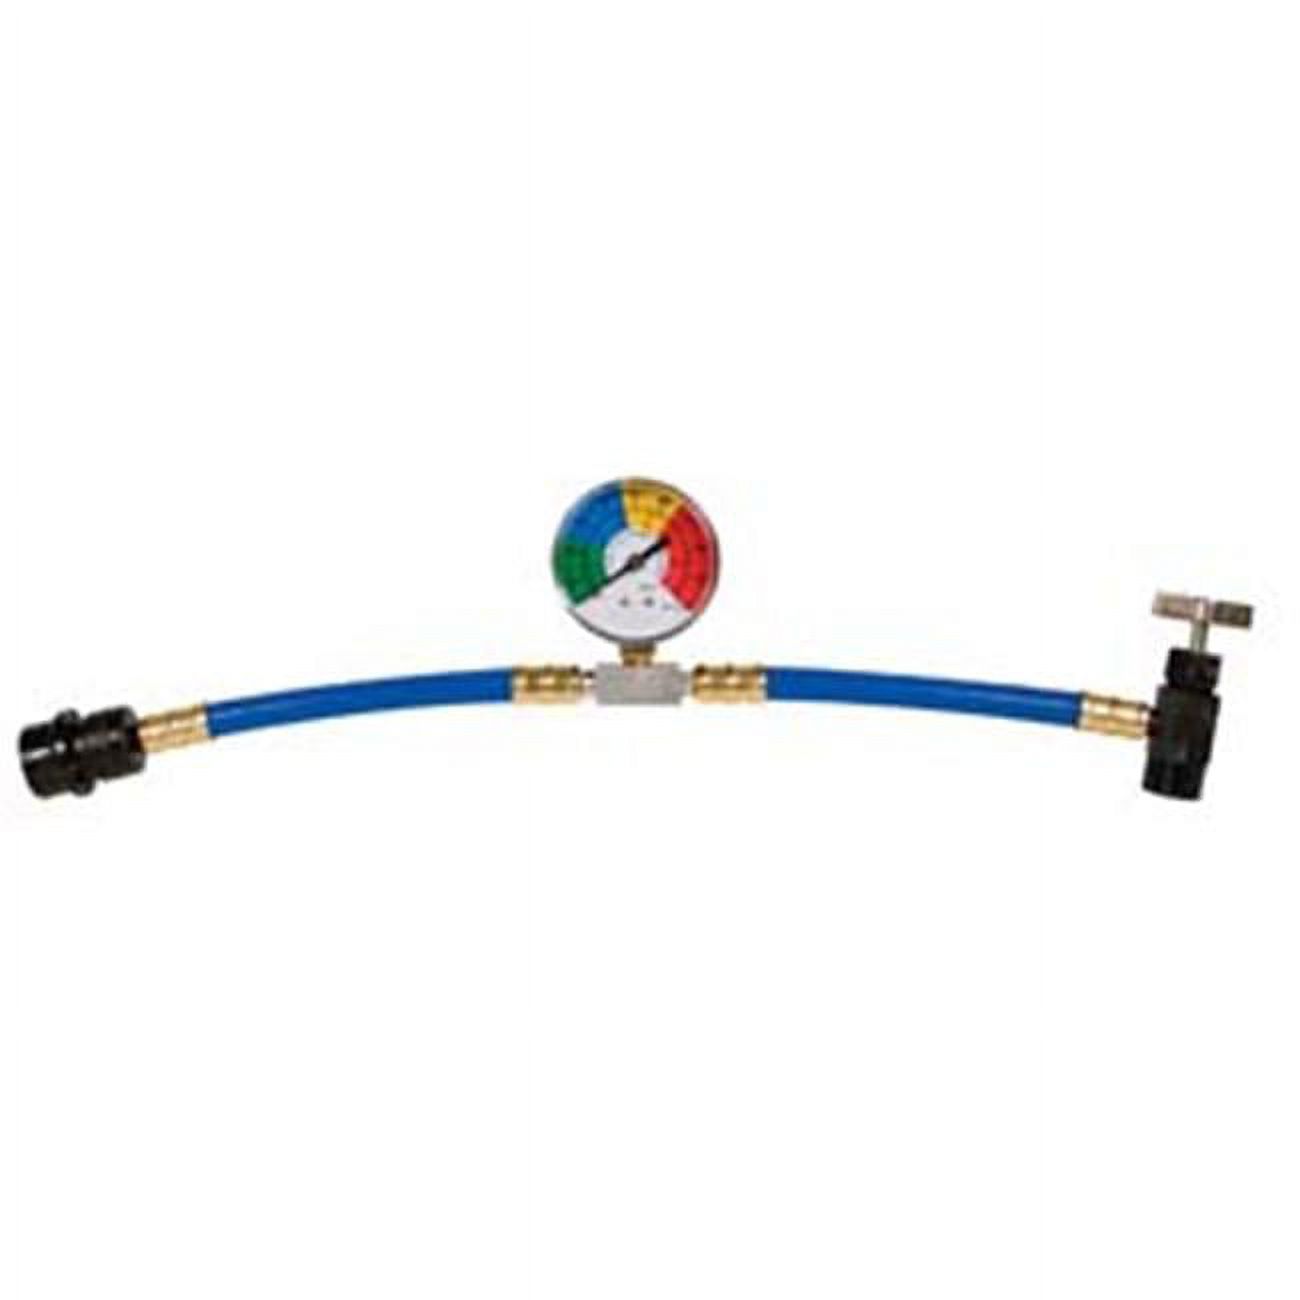 FJC FJ6036 Dispenser Recharge Hose and Gage for Can Refrigerants - image 1 of 1